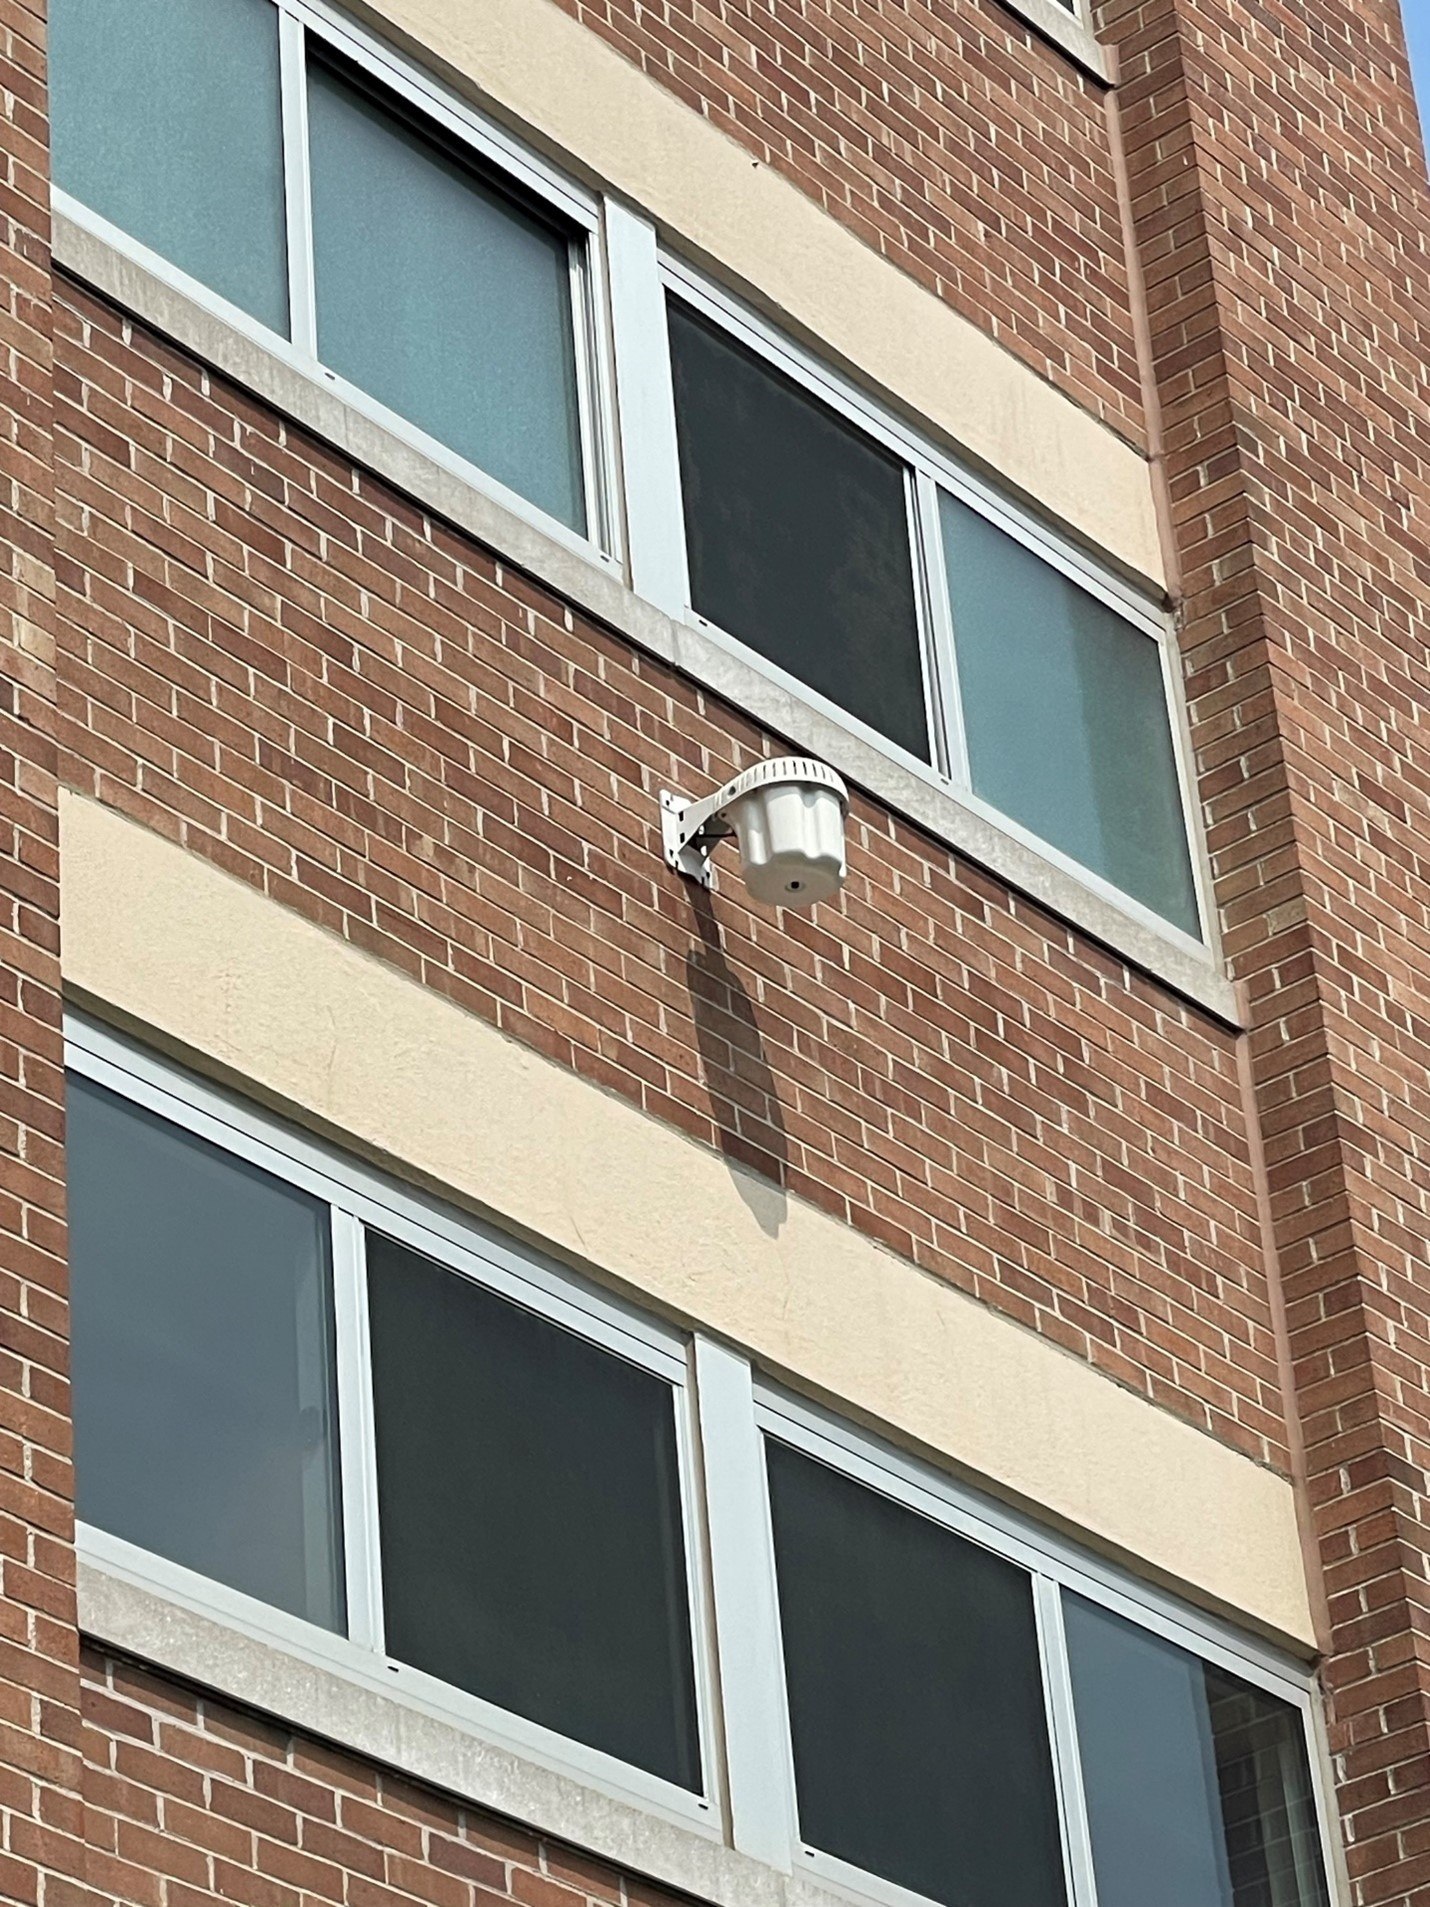 outdoor wireless access point on brown brick building